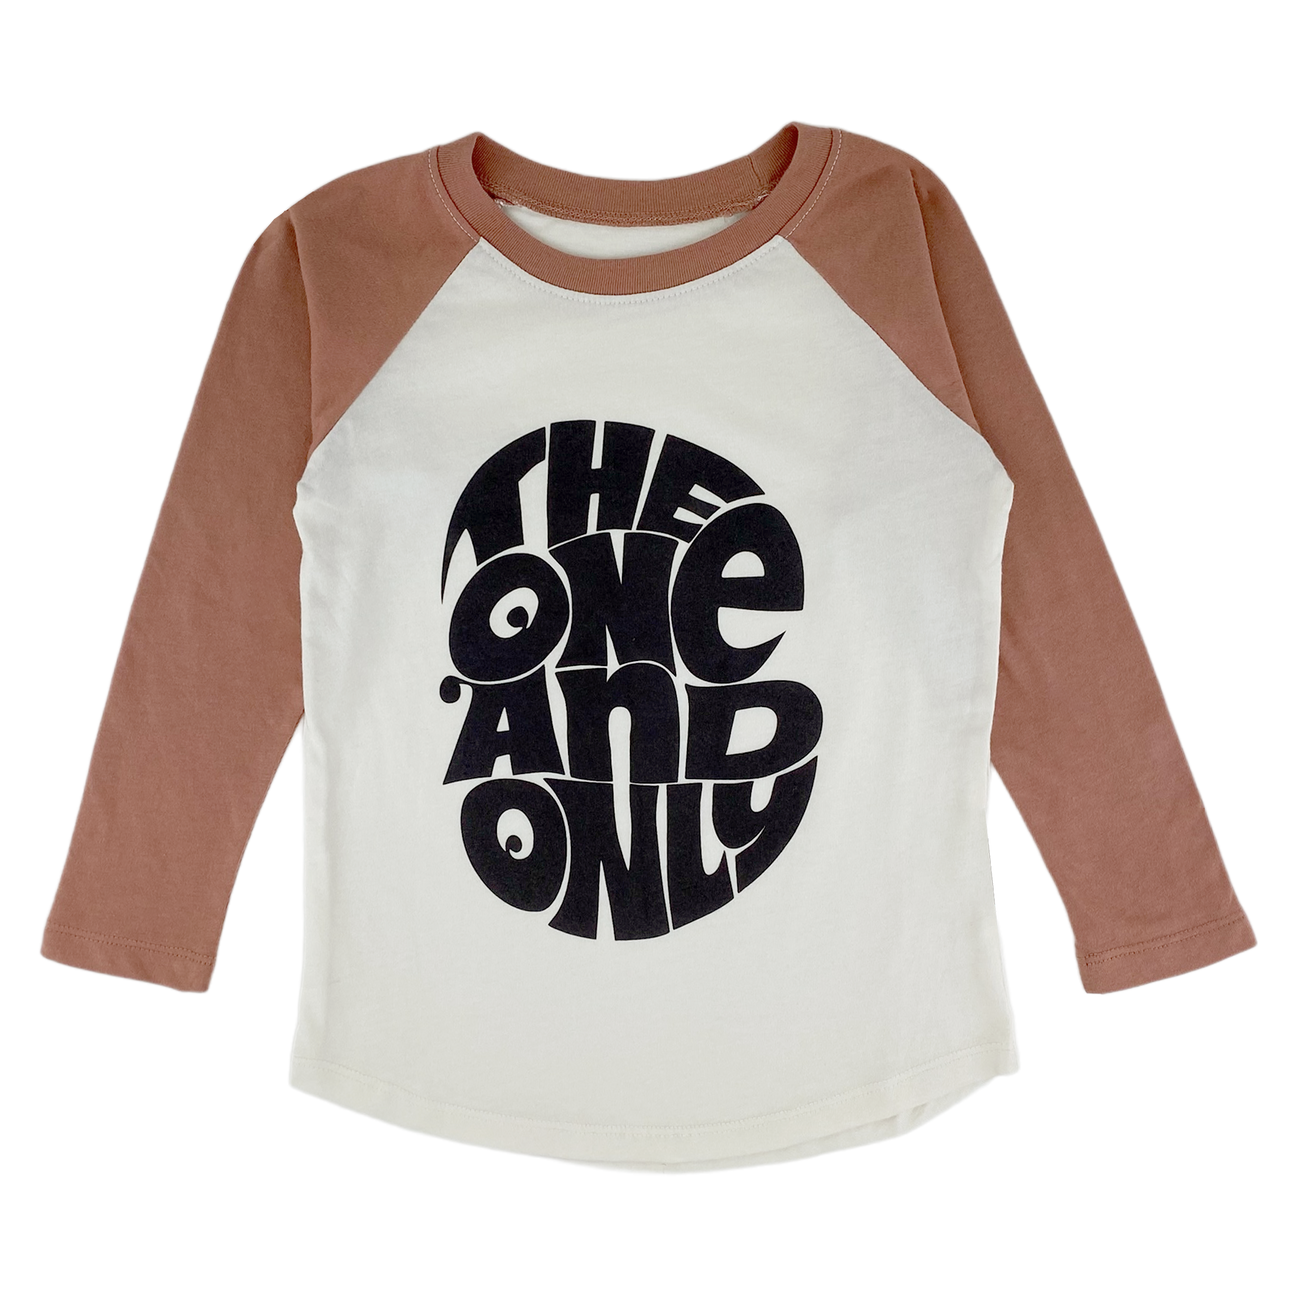 'The One and Only' Raglan Tee